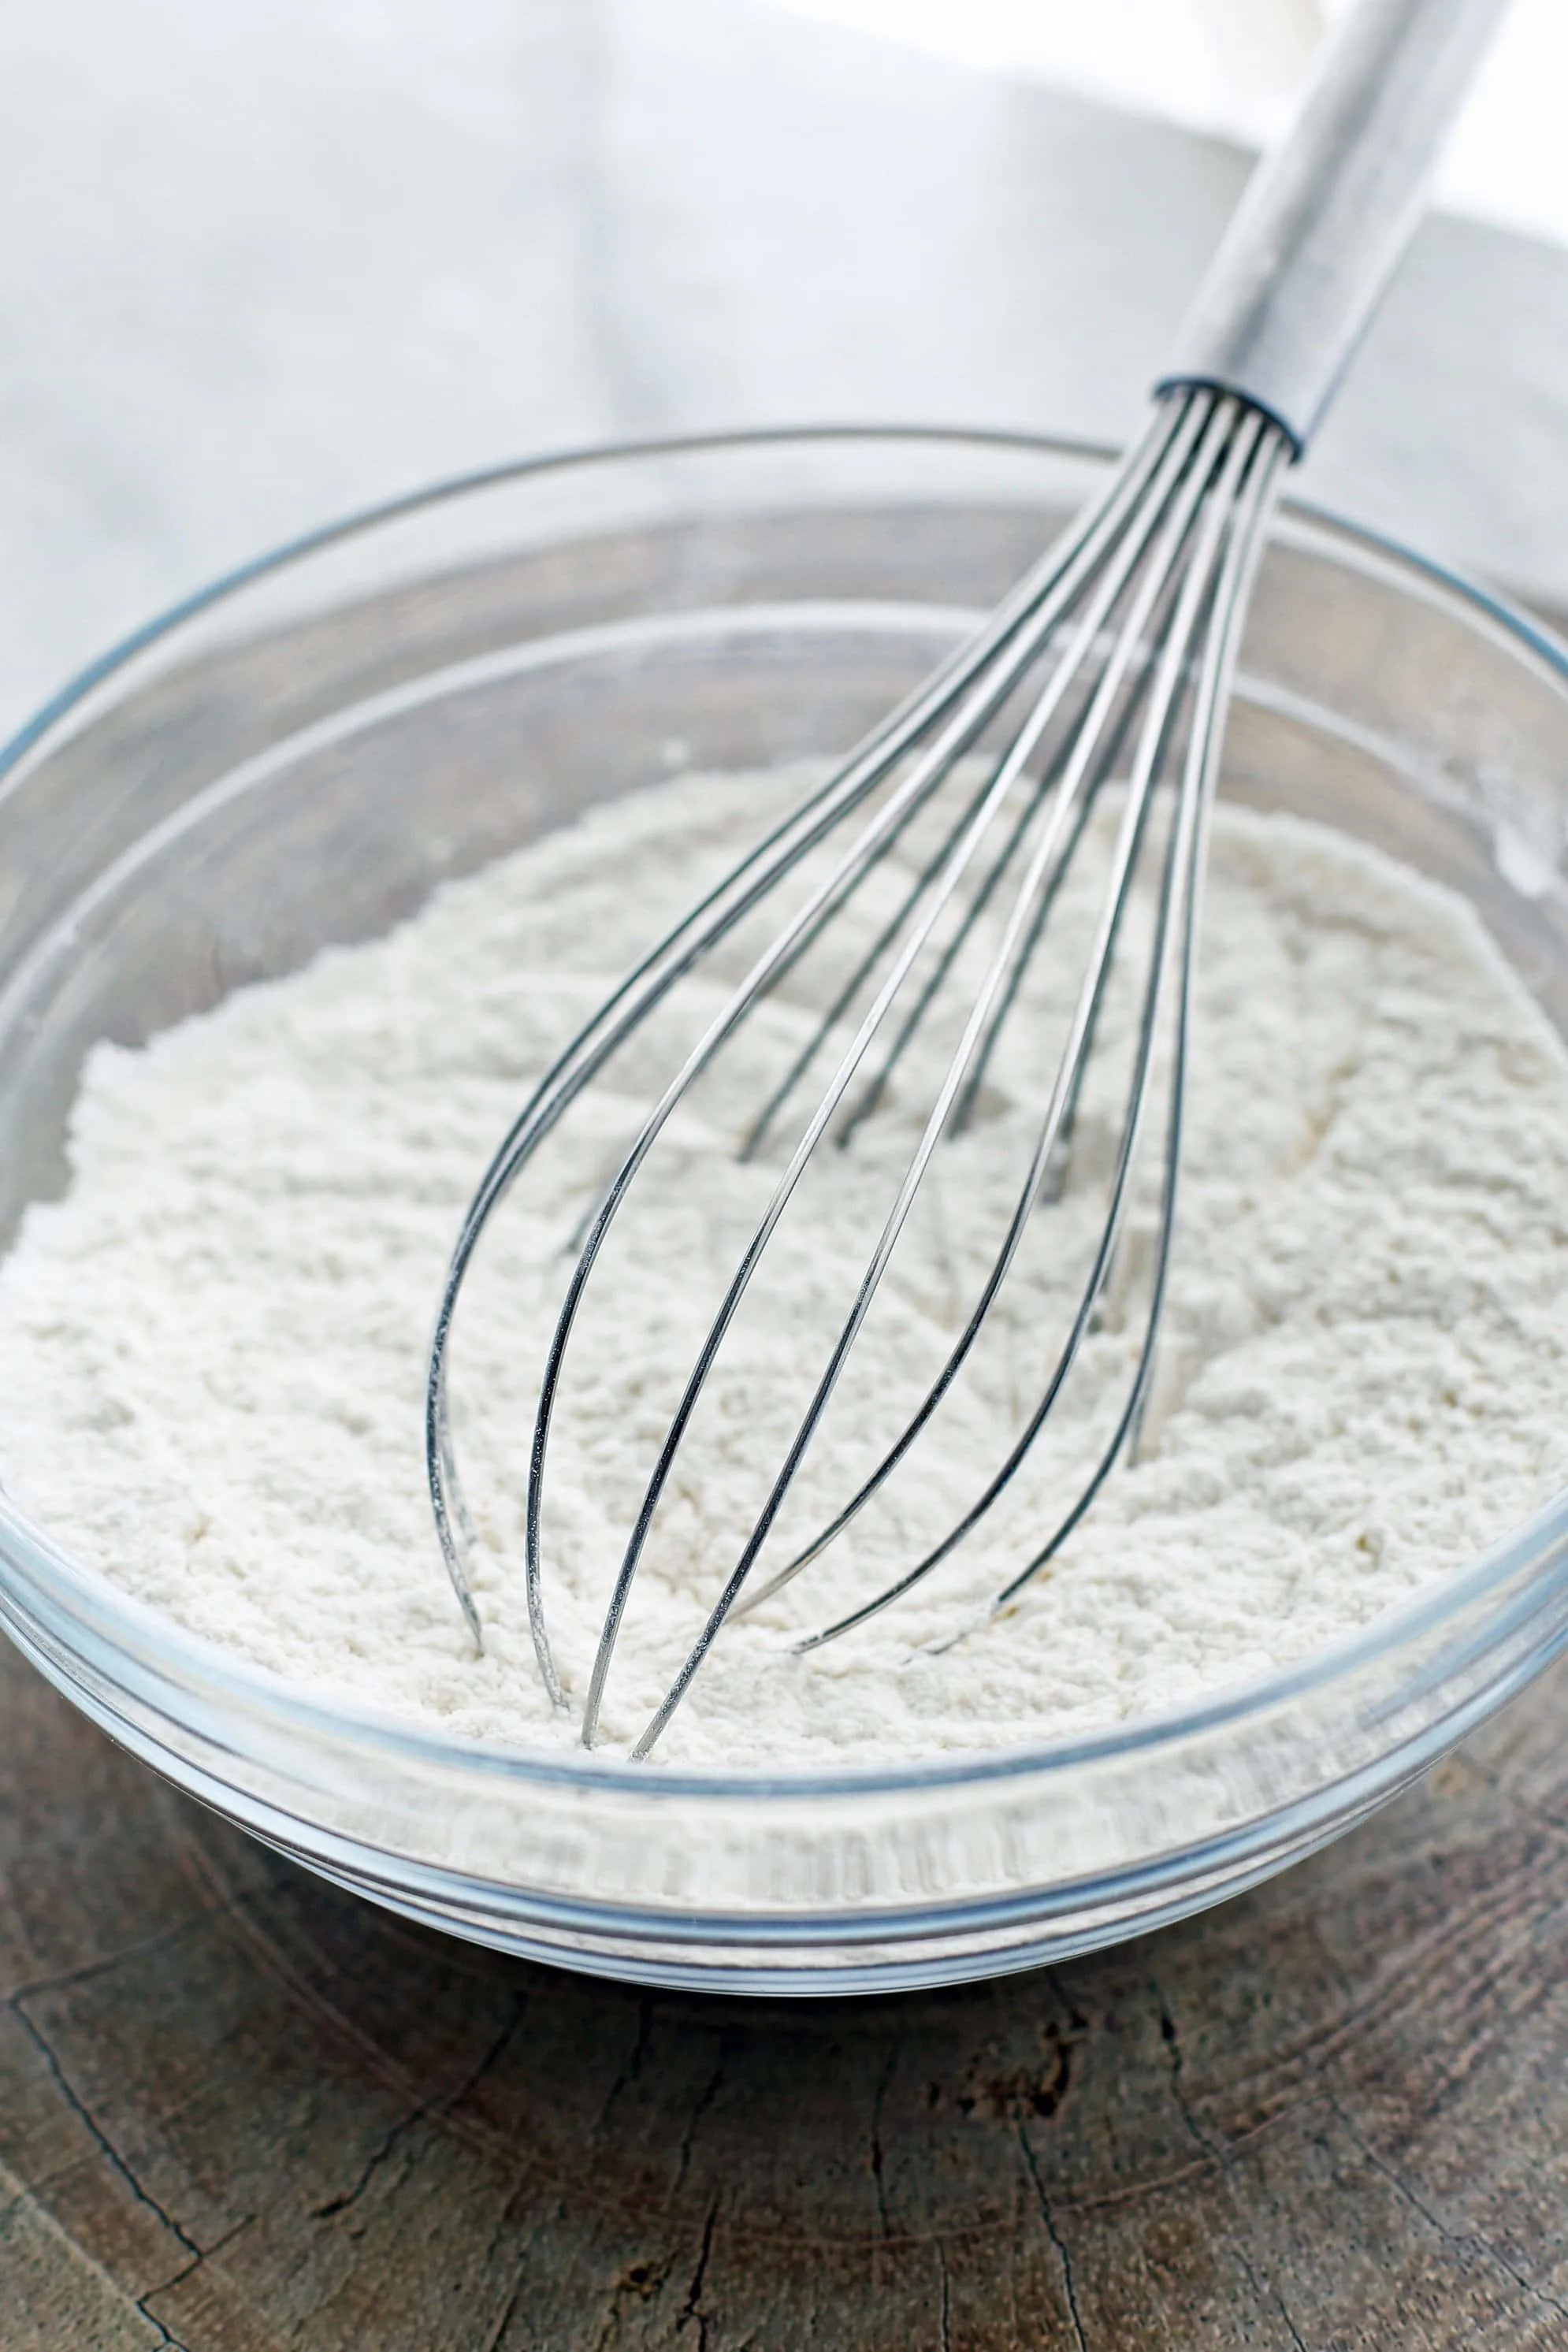 Dry baking ingredients in a glass bowl with a wire whisk.